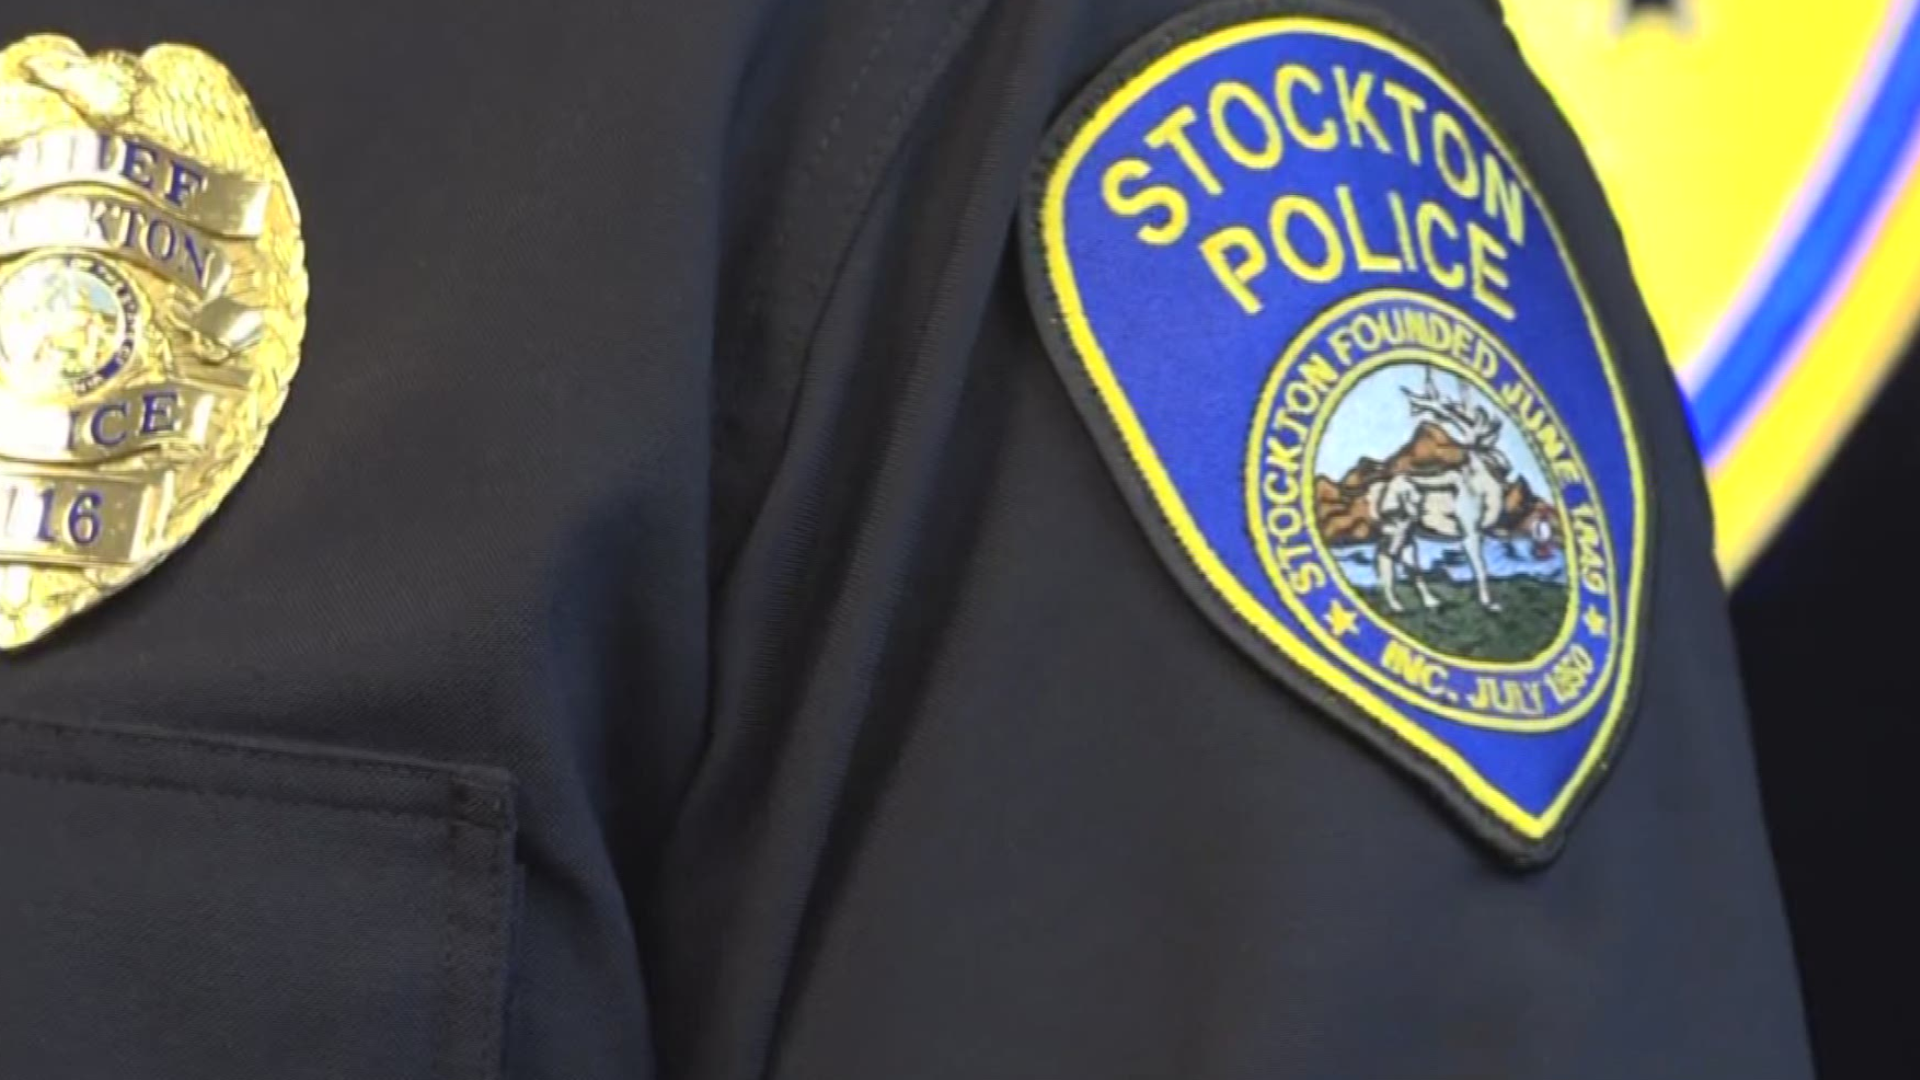 The City of Stockton has launched a new initiative to fight the rising number of homicides. Part of the plan includes adding more cops on the streets. ABC10’s Michael Anthony Adams has been looking into the initiative.